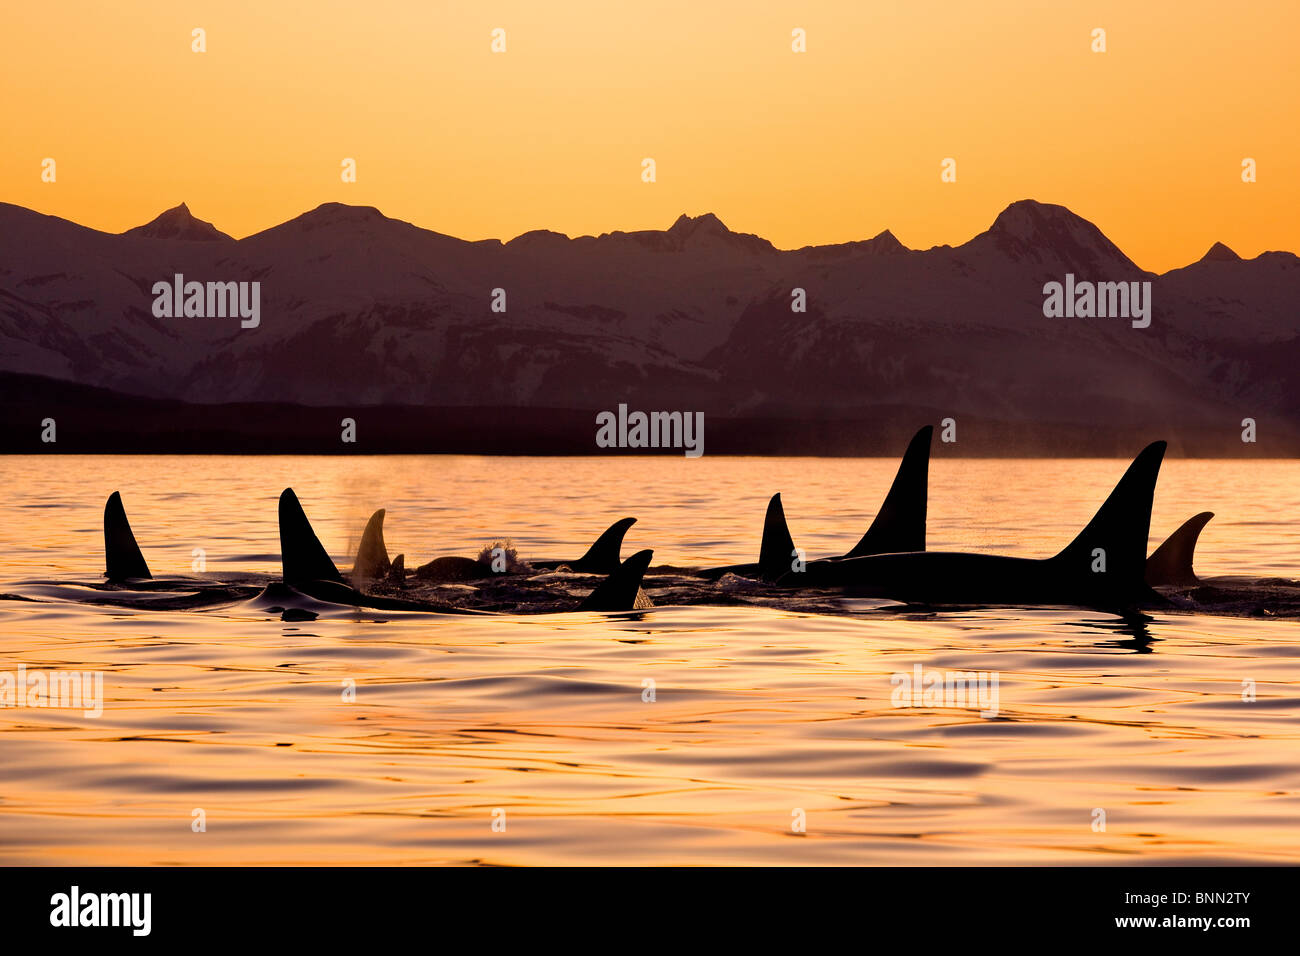 Silhouette of a pod of Orca whales in Lynn Canal with Chilkat Mountains in the background, Inside Passage, Alaska Stock Photo